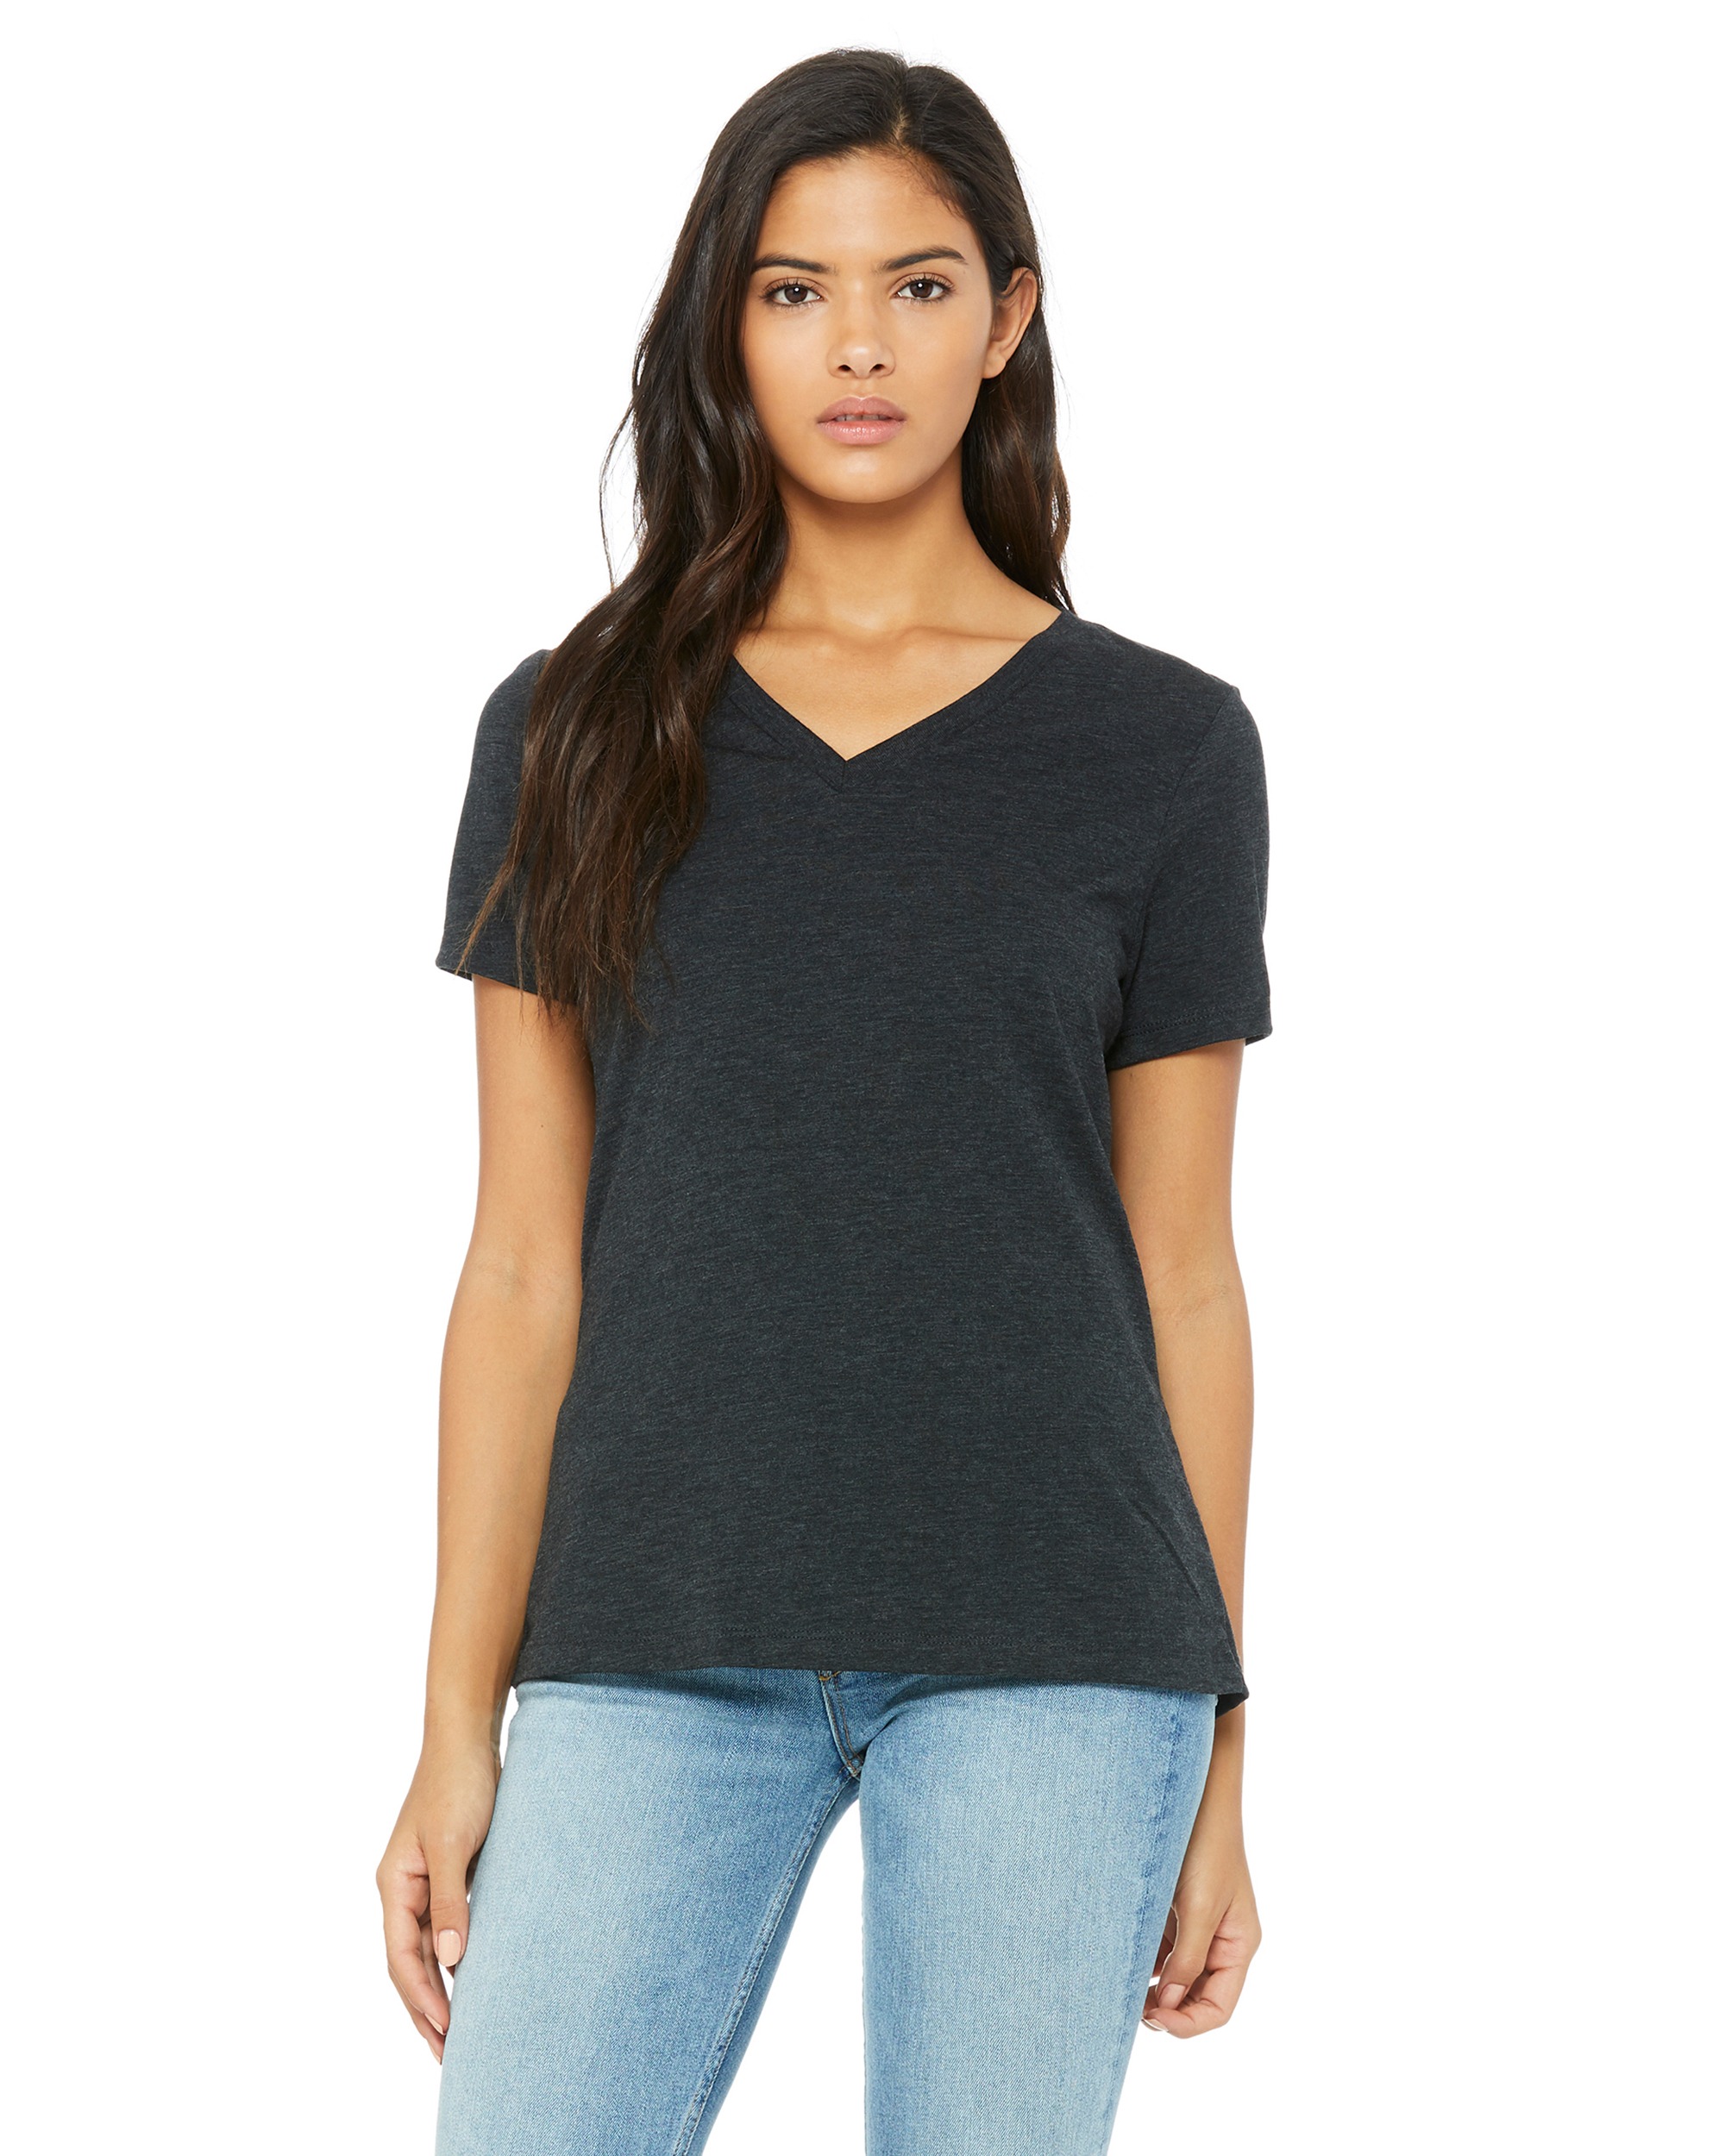 BELLA+CANVAS® 6415 Women's Relaxed Triblend Short Sleeve V-Neck Tee